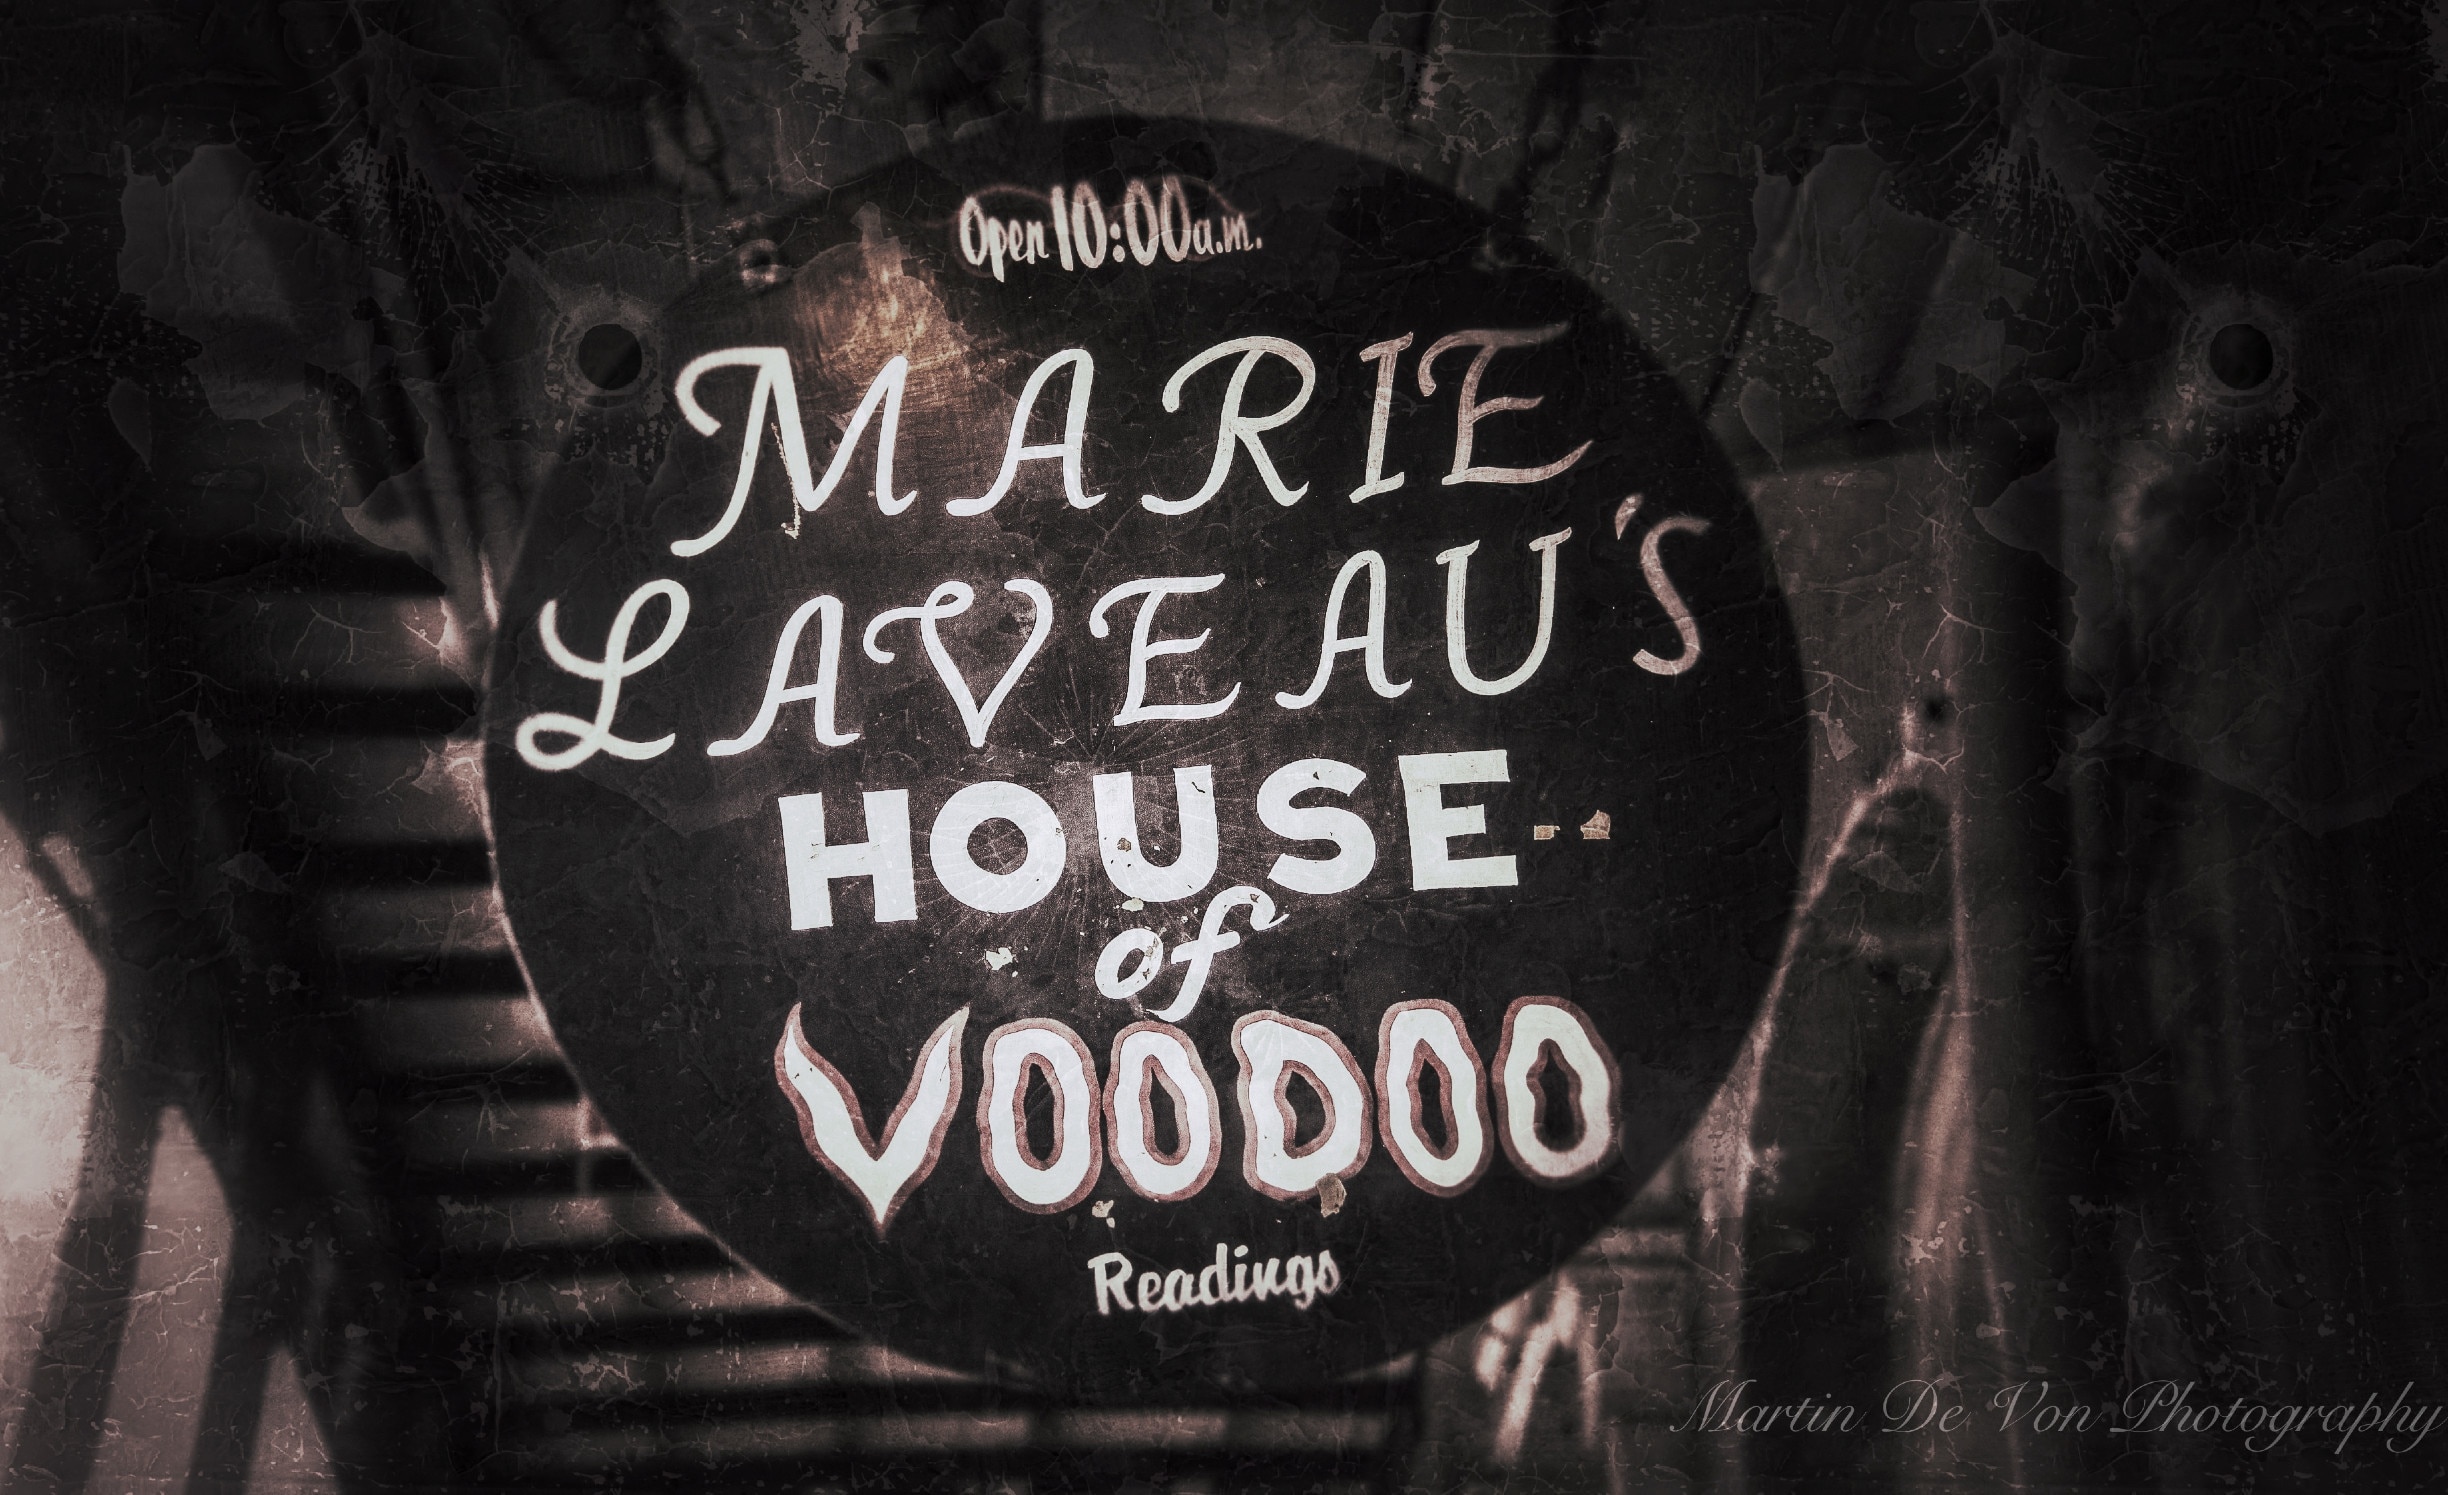 Marie Laveau House of Voodoo, Vieux Carre District, Louisiana, United States of America